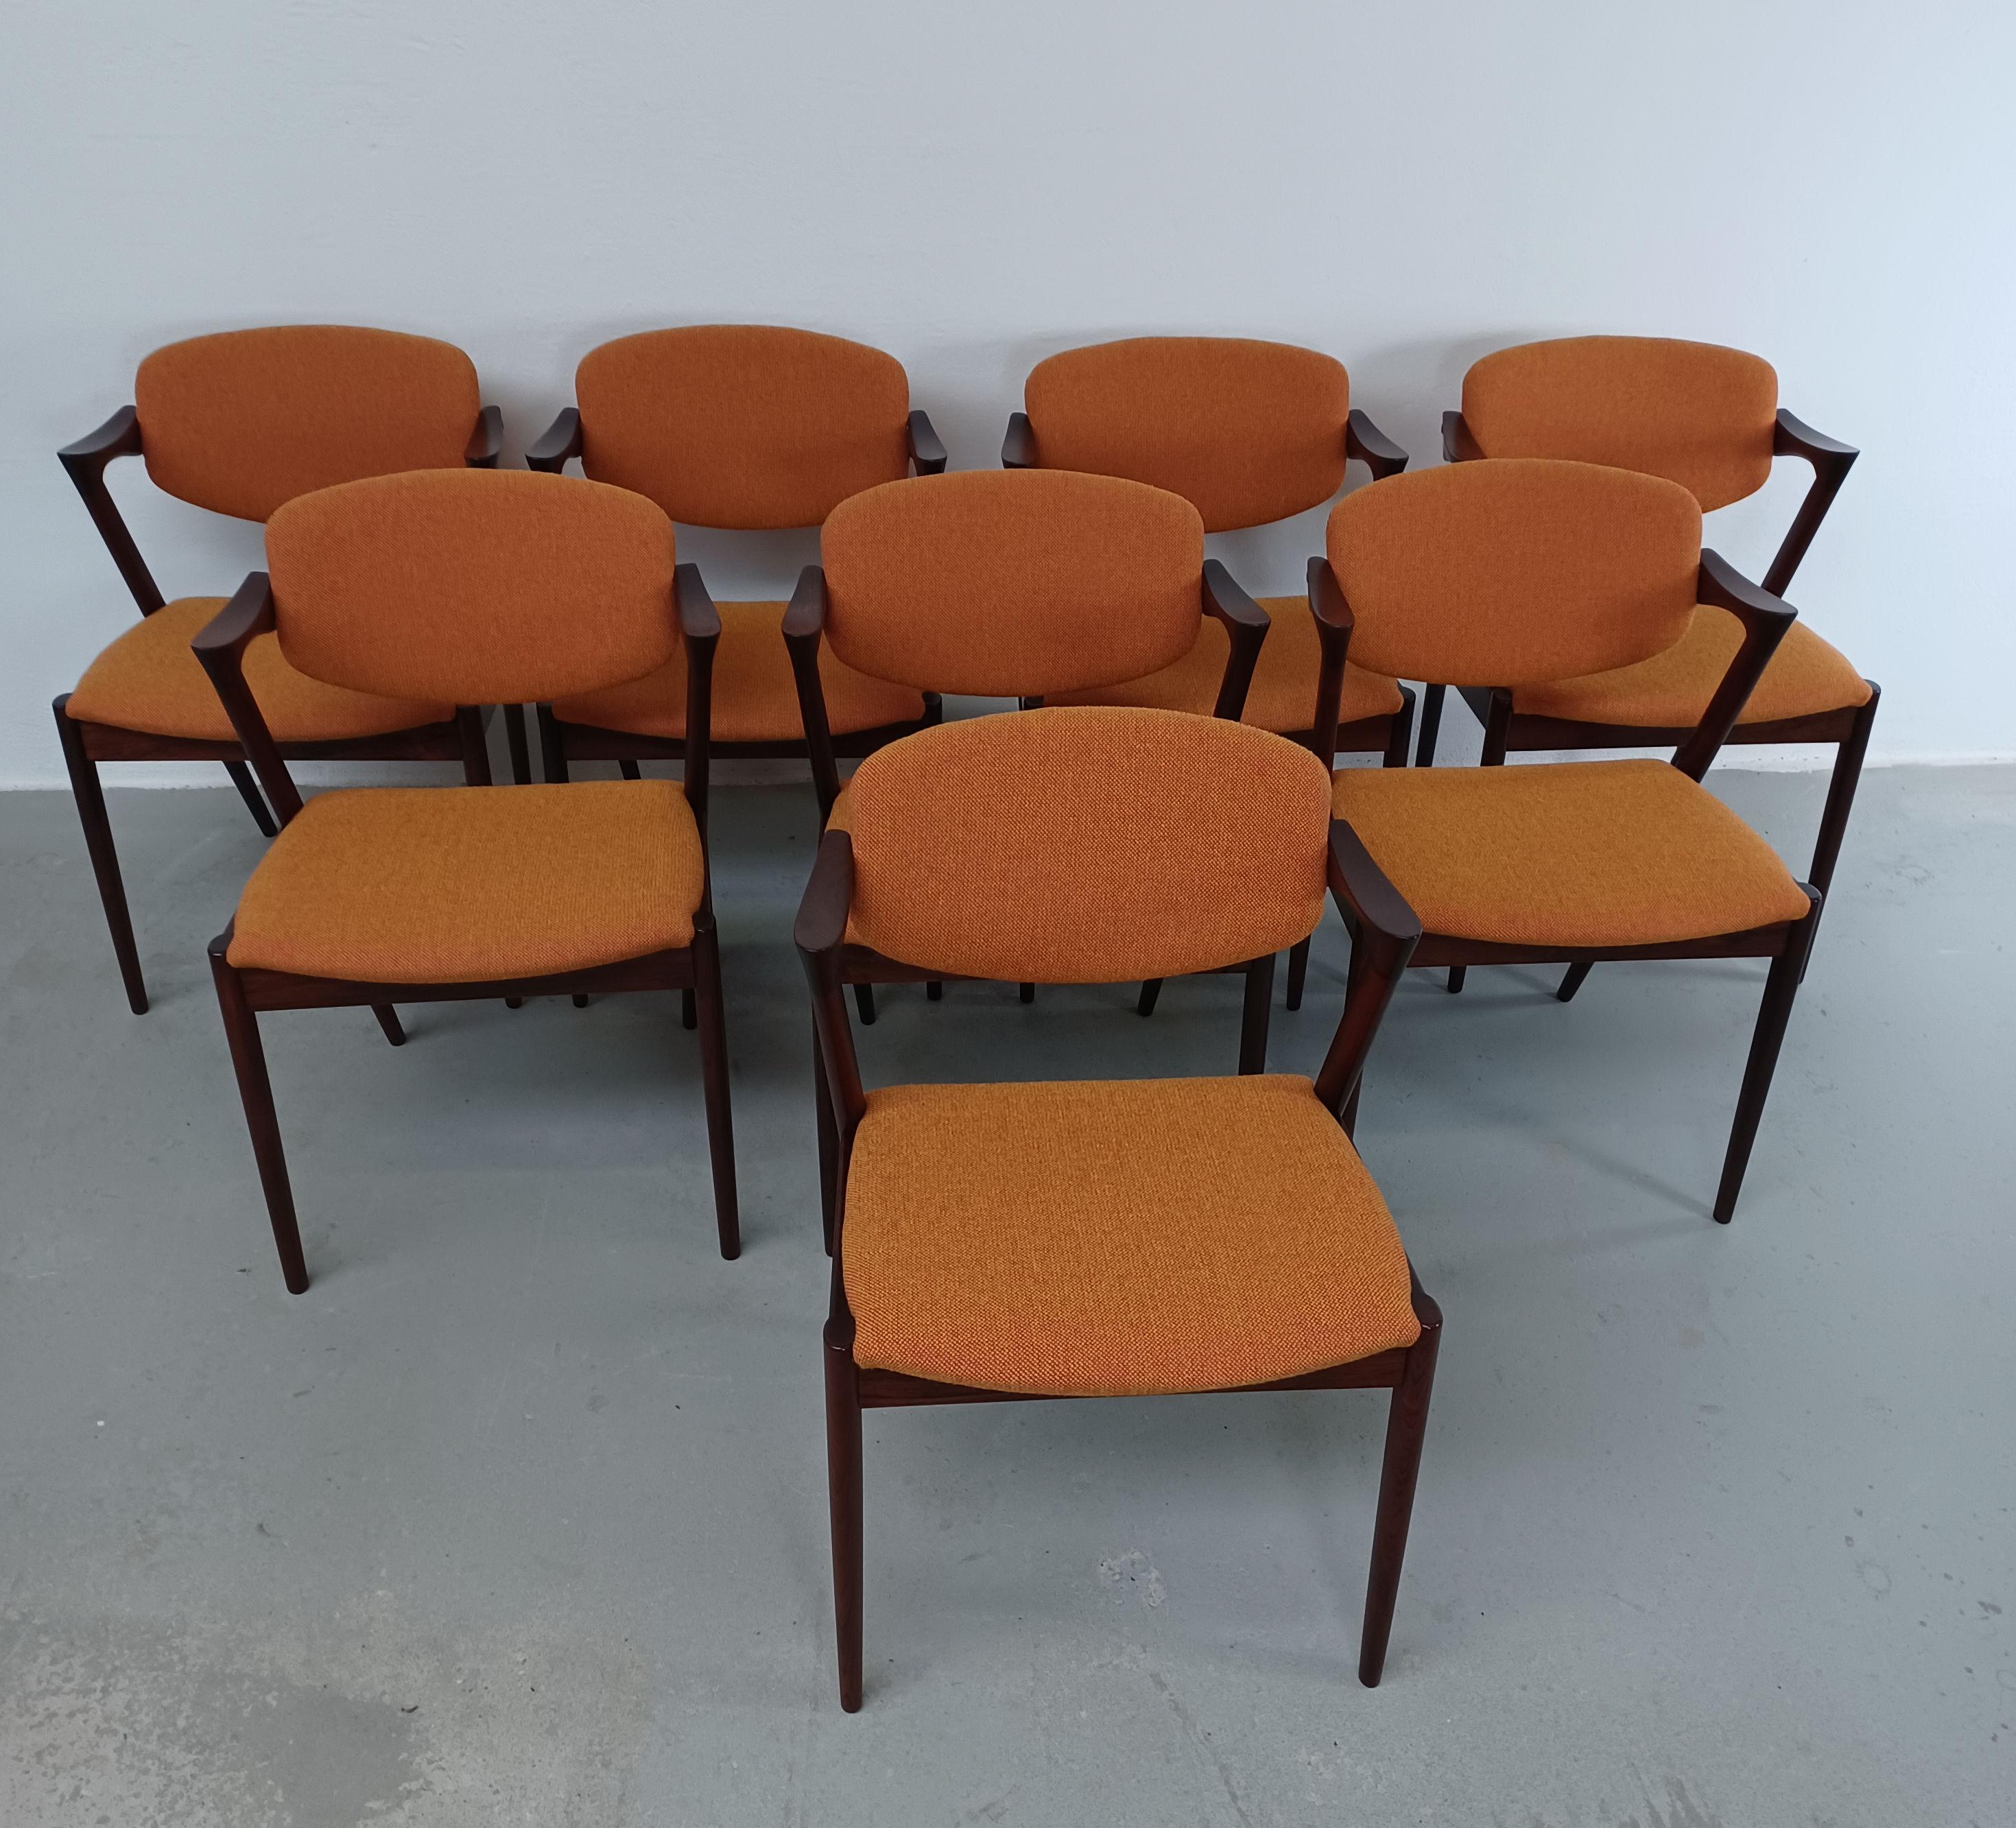 Set of eight fully restored, 1960s rosewood dining chairs by Kai Kristiansen for Schous Møbelfabrik with custom upholstery.

The chairs have Kai Kristiansens typical light and elegant design that make them fit in easily where you want them in your